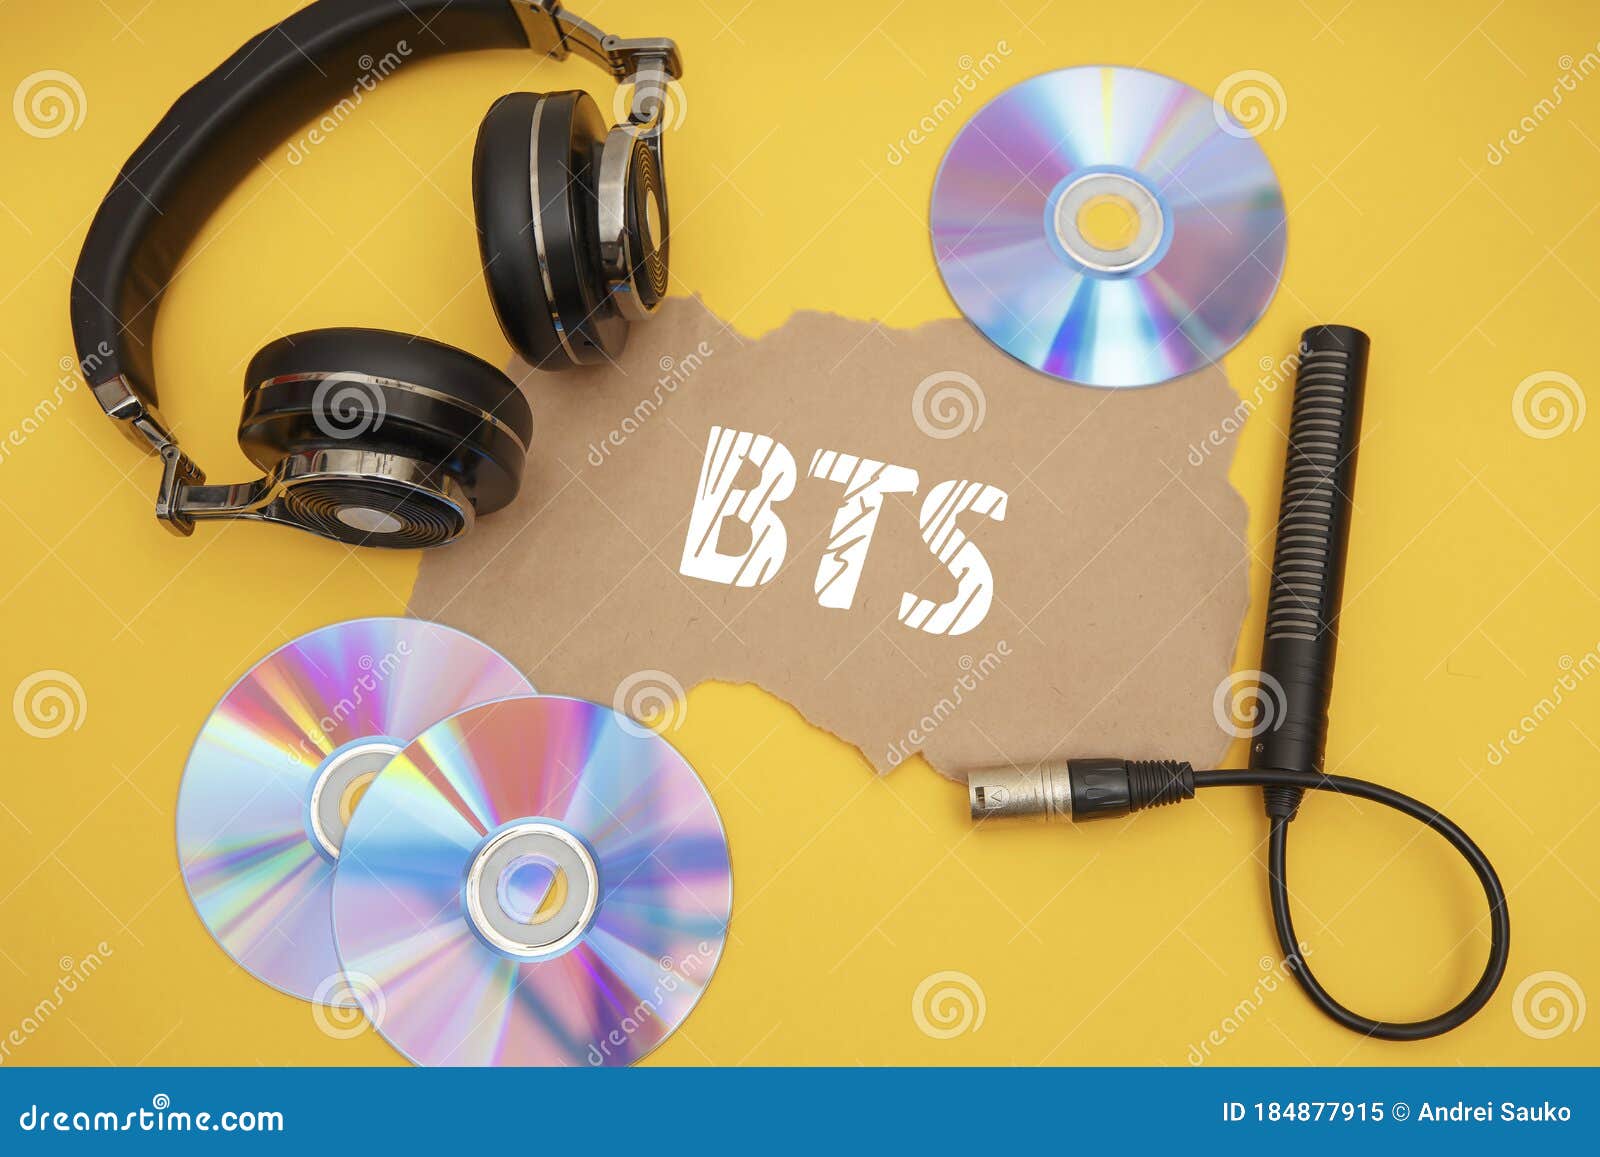 BTS Concept with Headphones and Music Discs Stock Image - Image of bangkok,  landscape: 184877915